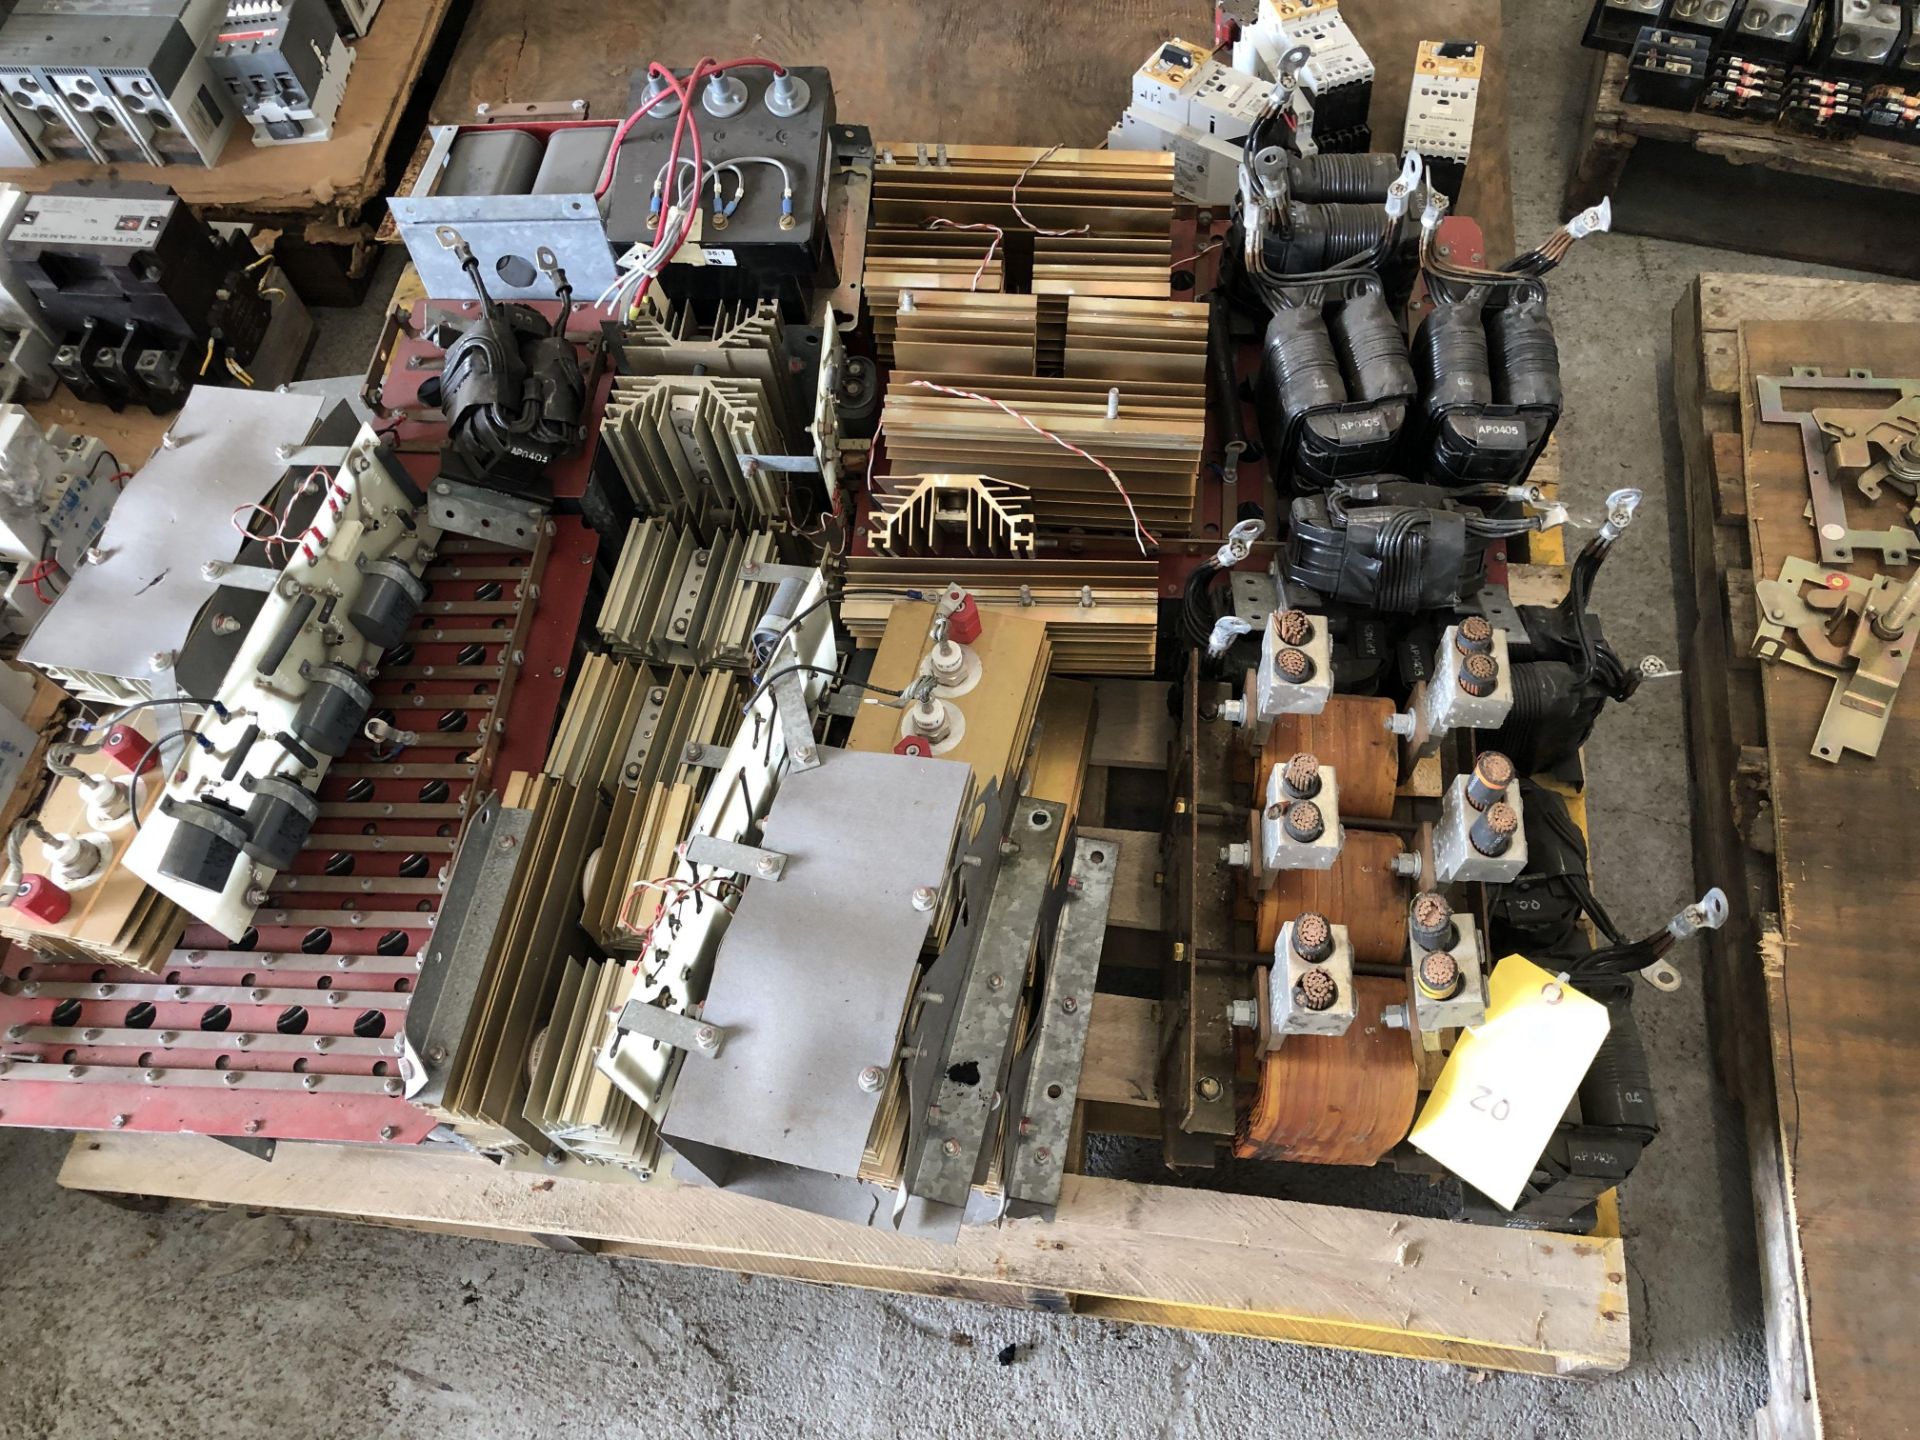 Pallet of Electrical Components